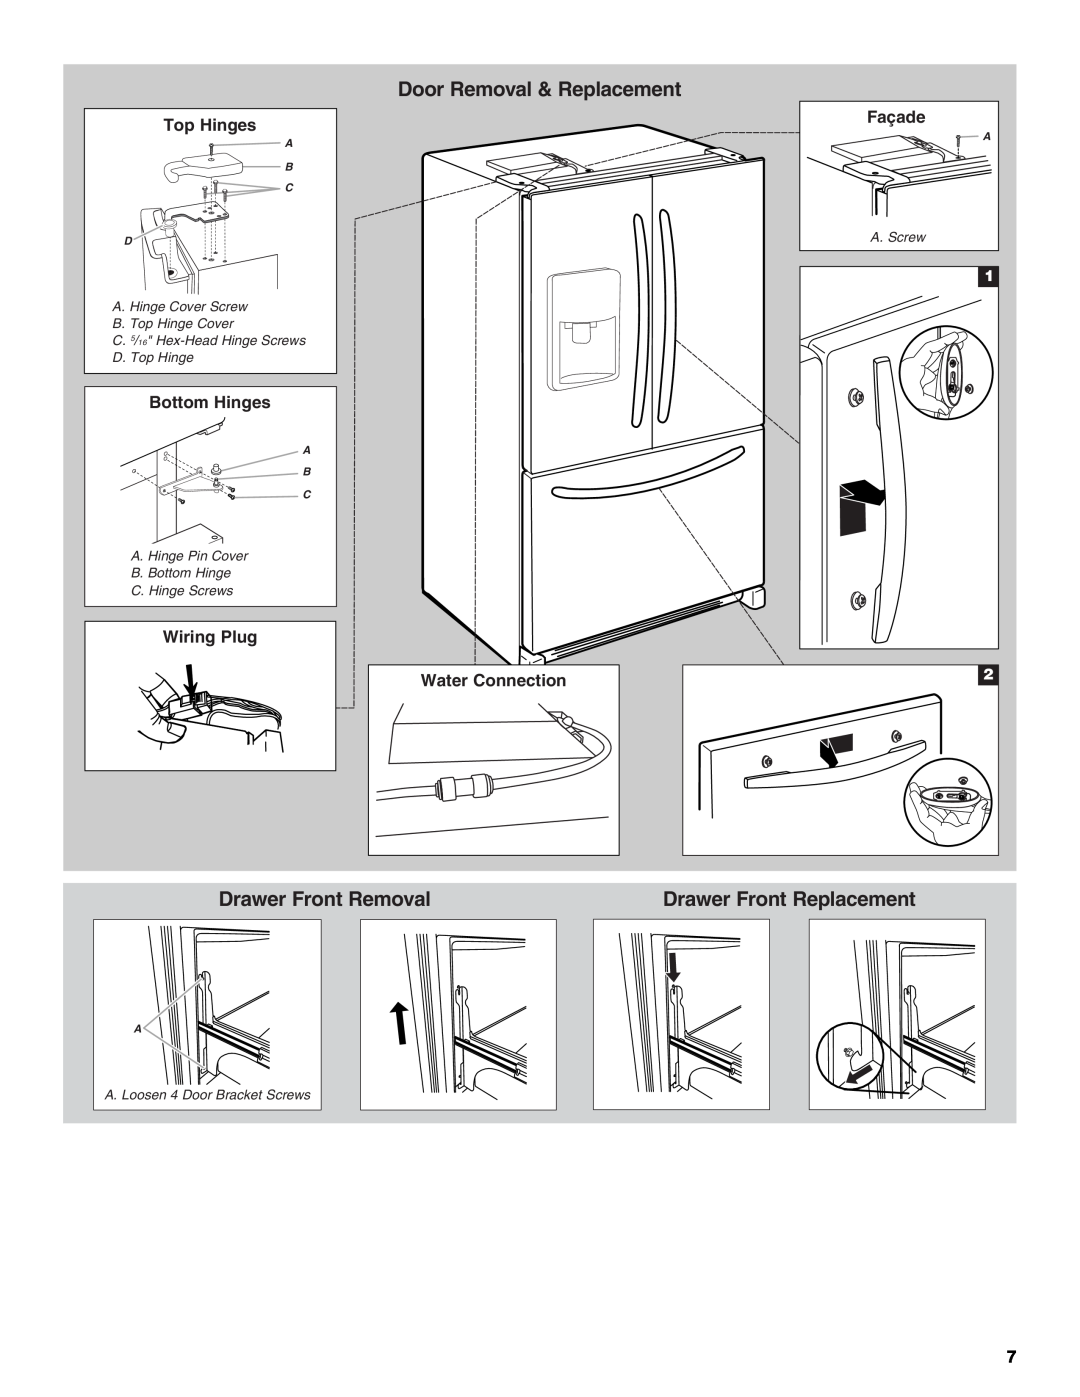 Whirlpool W10245525A Door Removal & Replacement, Drawer Front Removal, Drawer Front Replacement, Top Hinges, Bottom Hinges 